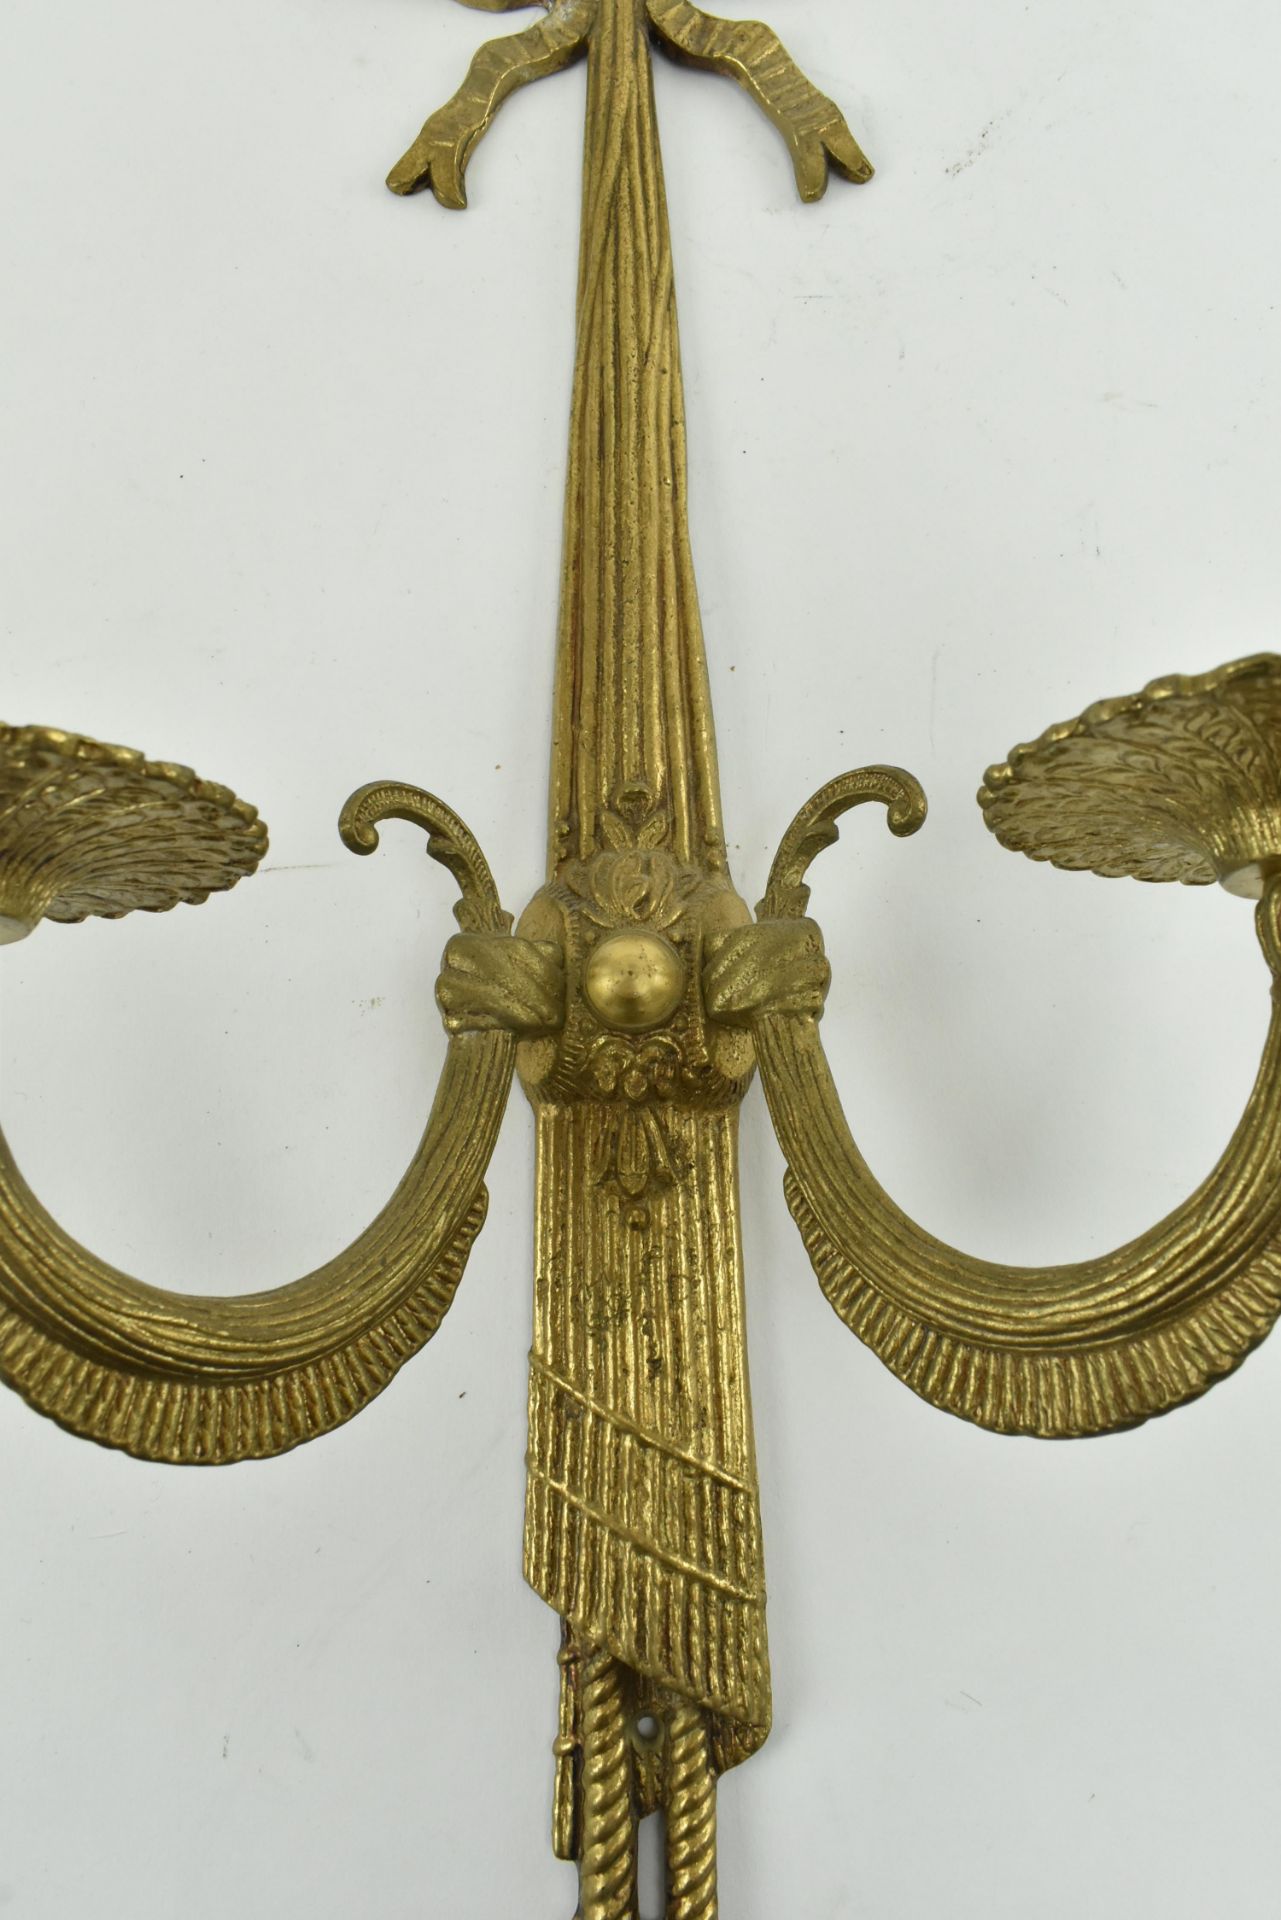 EARLY 20TH CENTURY REGENCY REVIVAL GILT METAL WALL SCONCE - Image 5 of 7